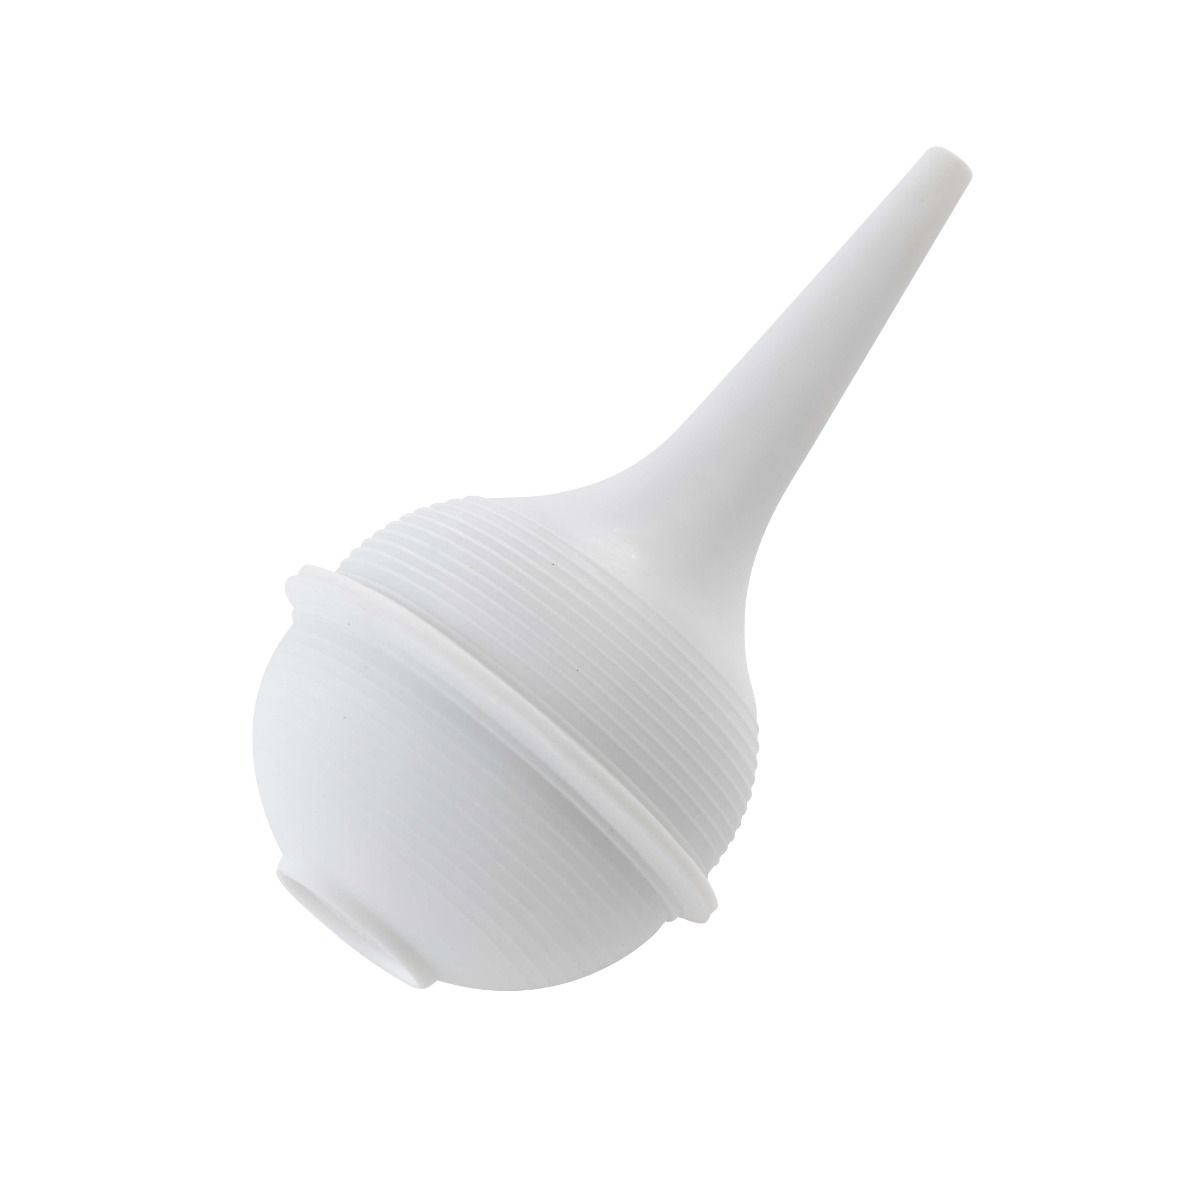 Grownsy Bc023 Baby Nasal Aspirator Nose Sucker Nose Cleaner Rechargeable, White, Size: Bar Shape